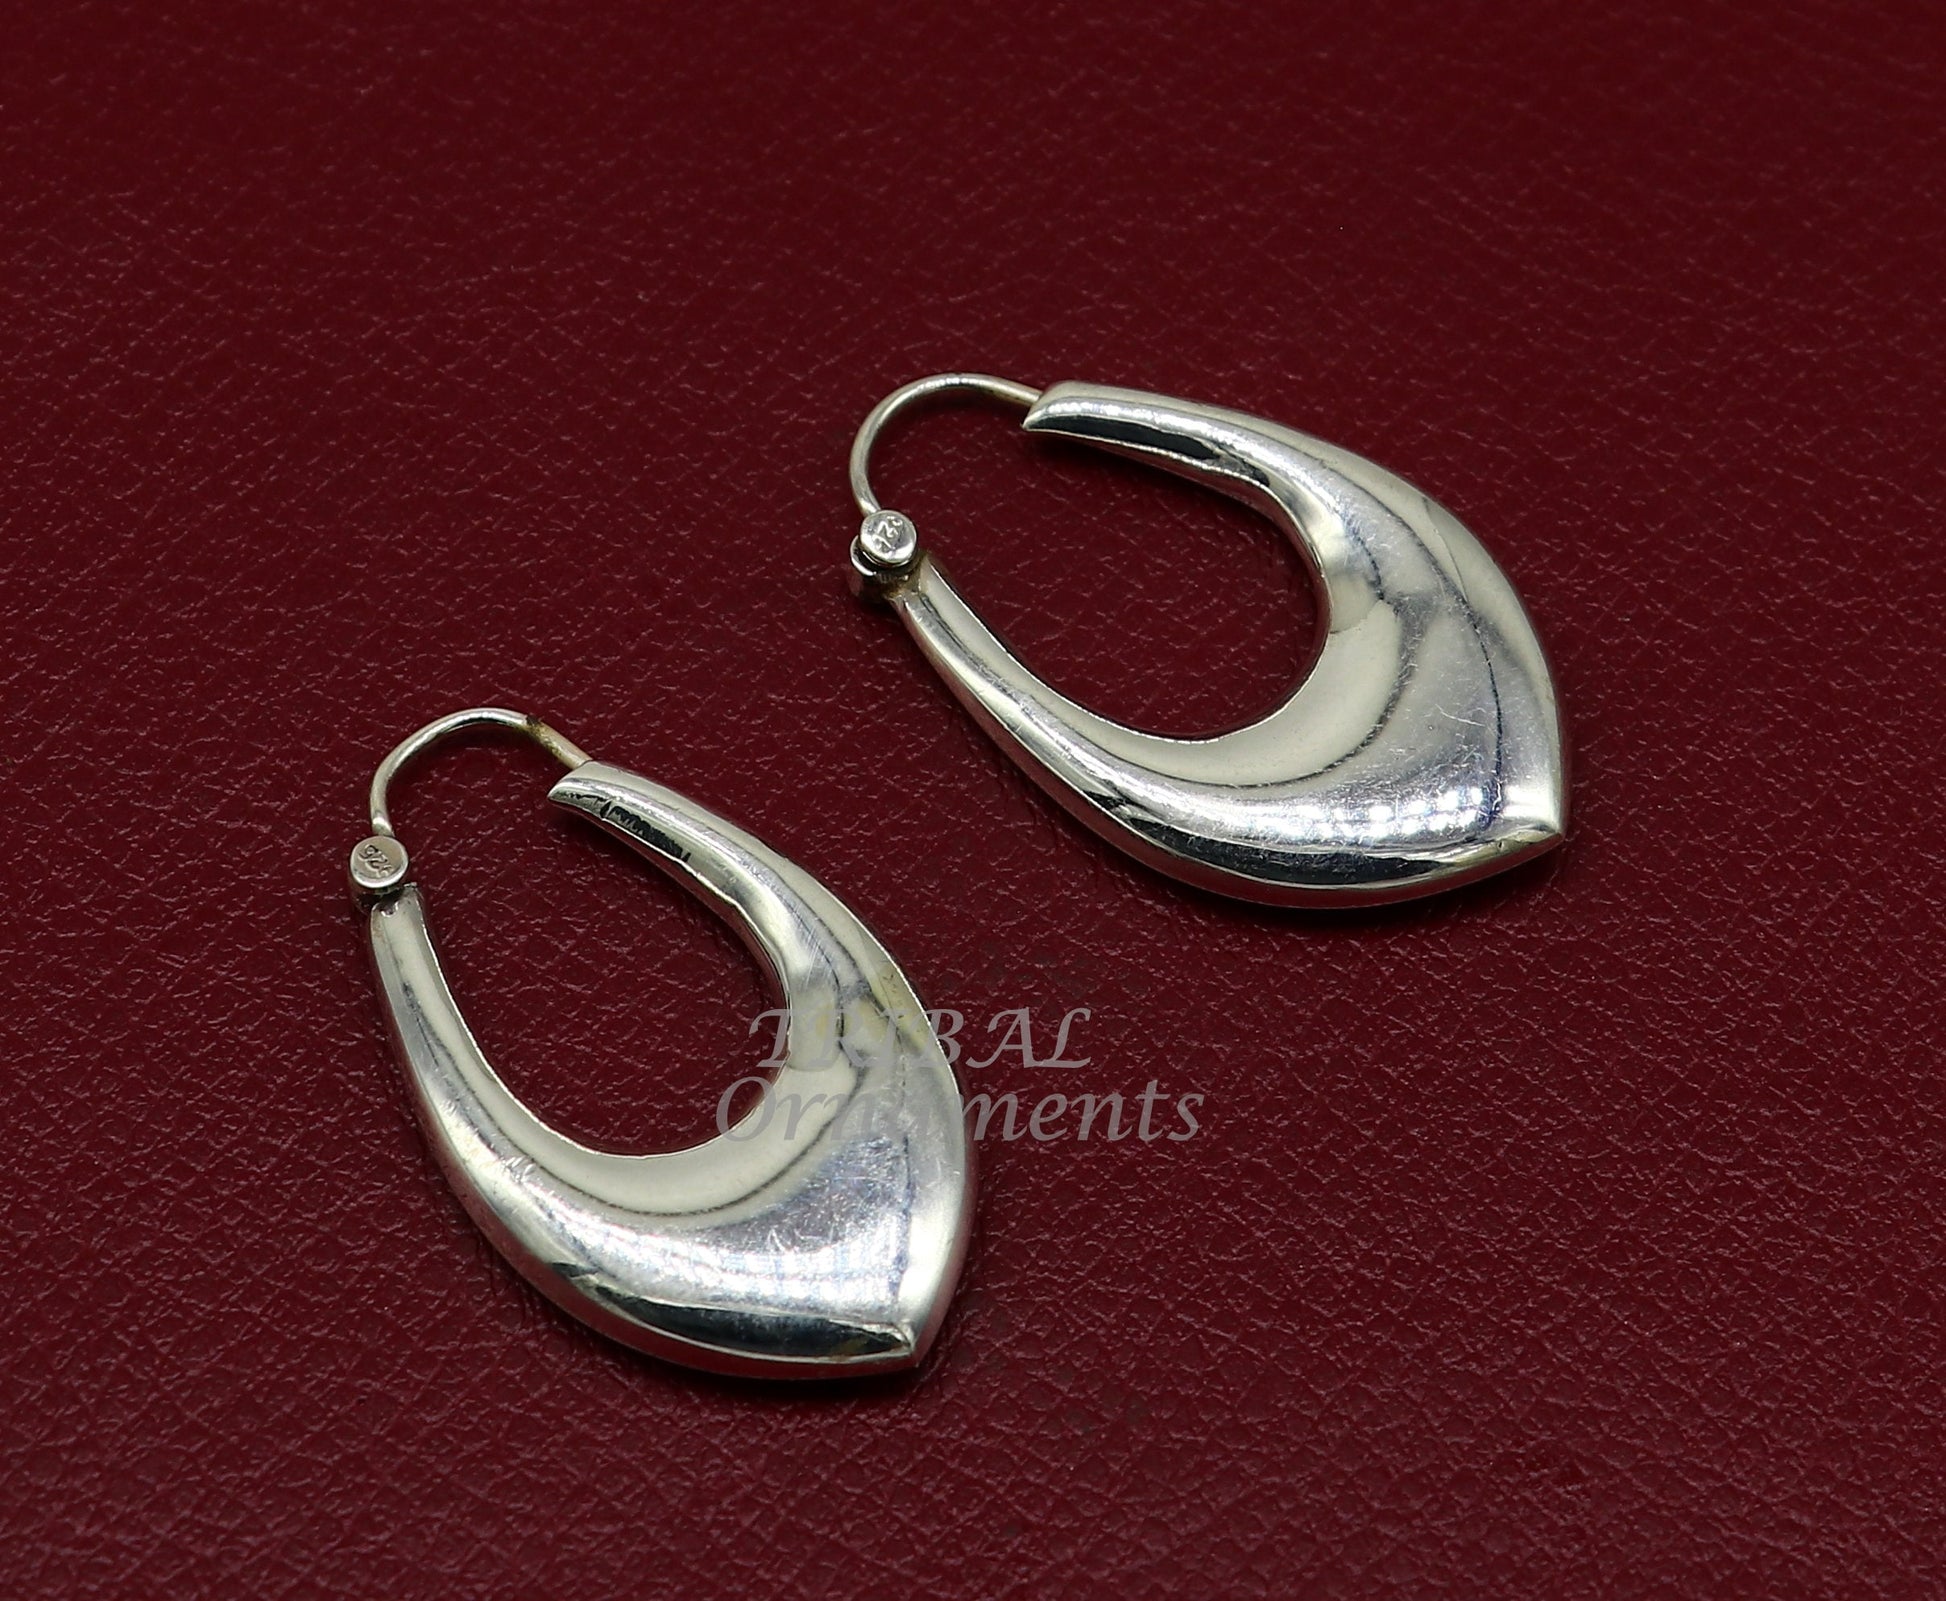 Vintage Design 925 sterling silver fabulous hoops earring, tribal kundal earring from Rajasthan India, best gifting unisex jewelry s1127 - TRIBAL ORNAMENTS